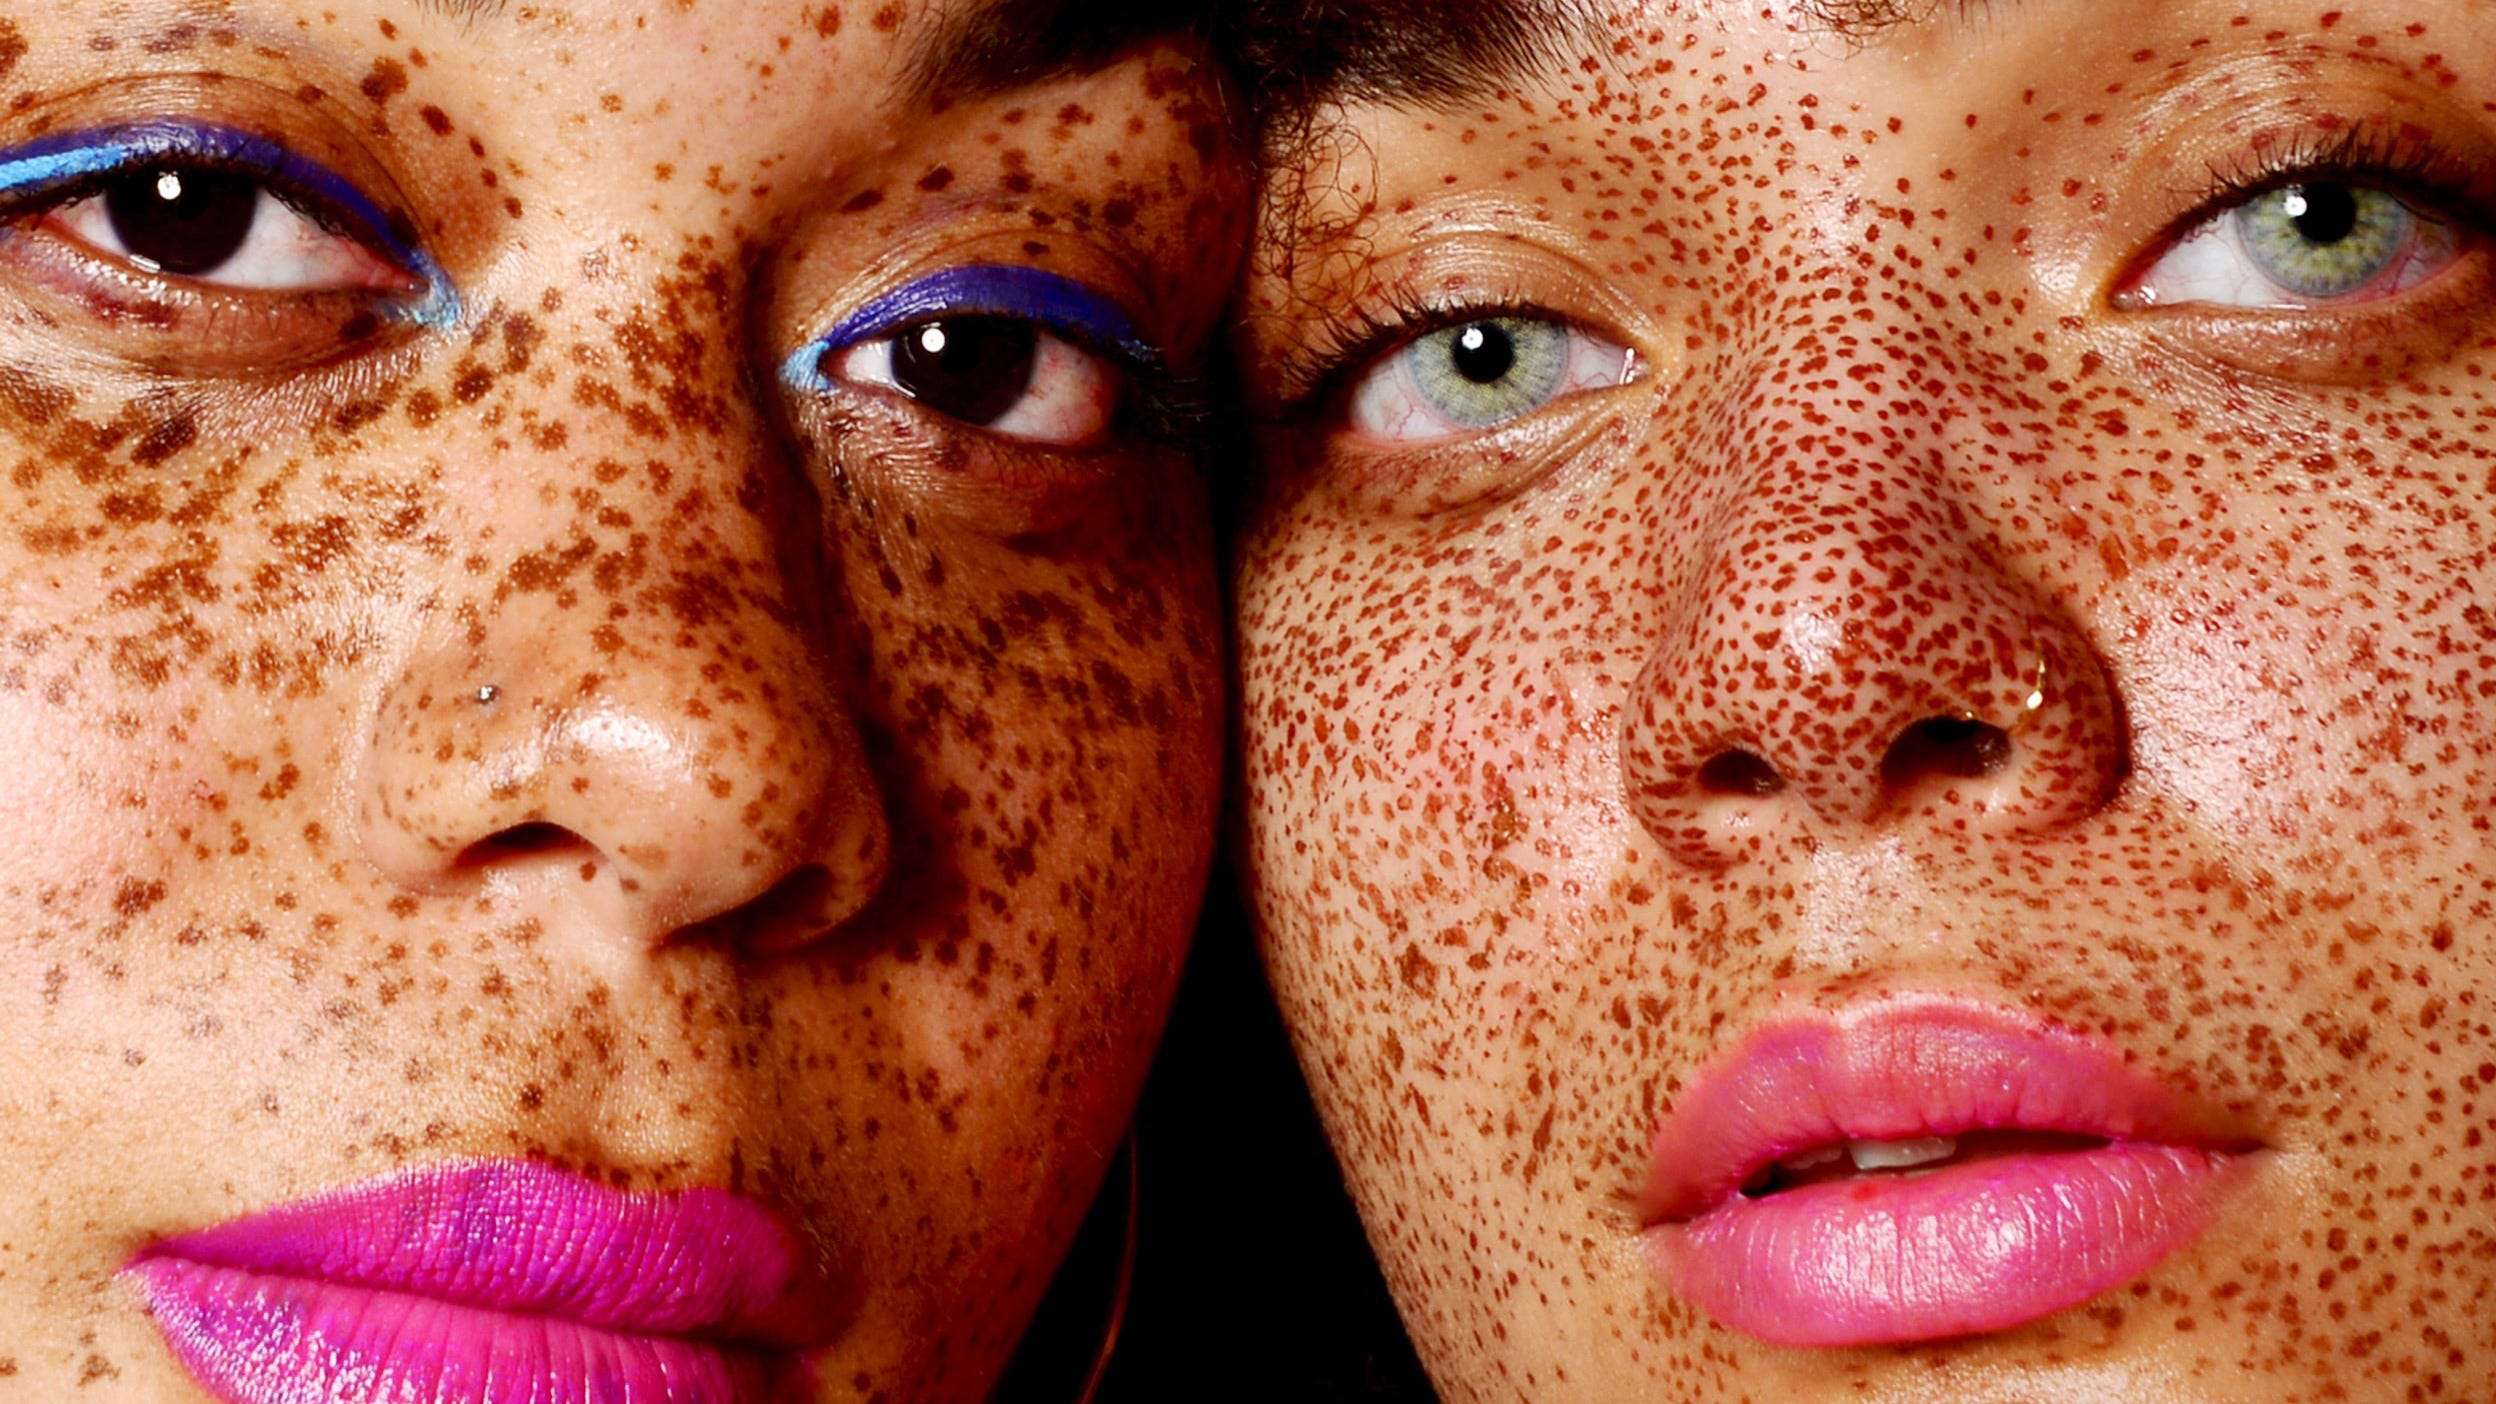 Ever wonder what causes freckles? Here's how they form ...